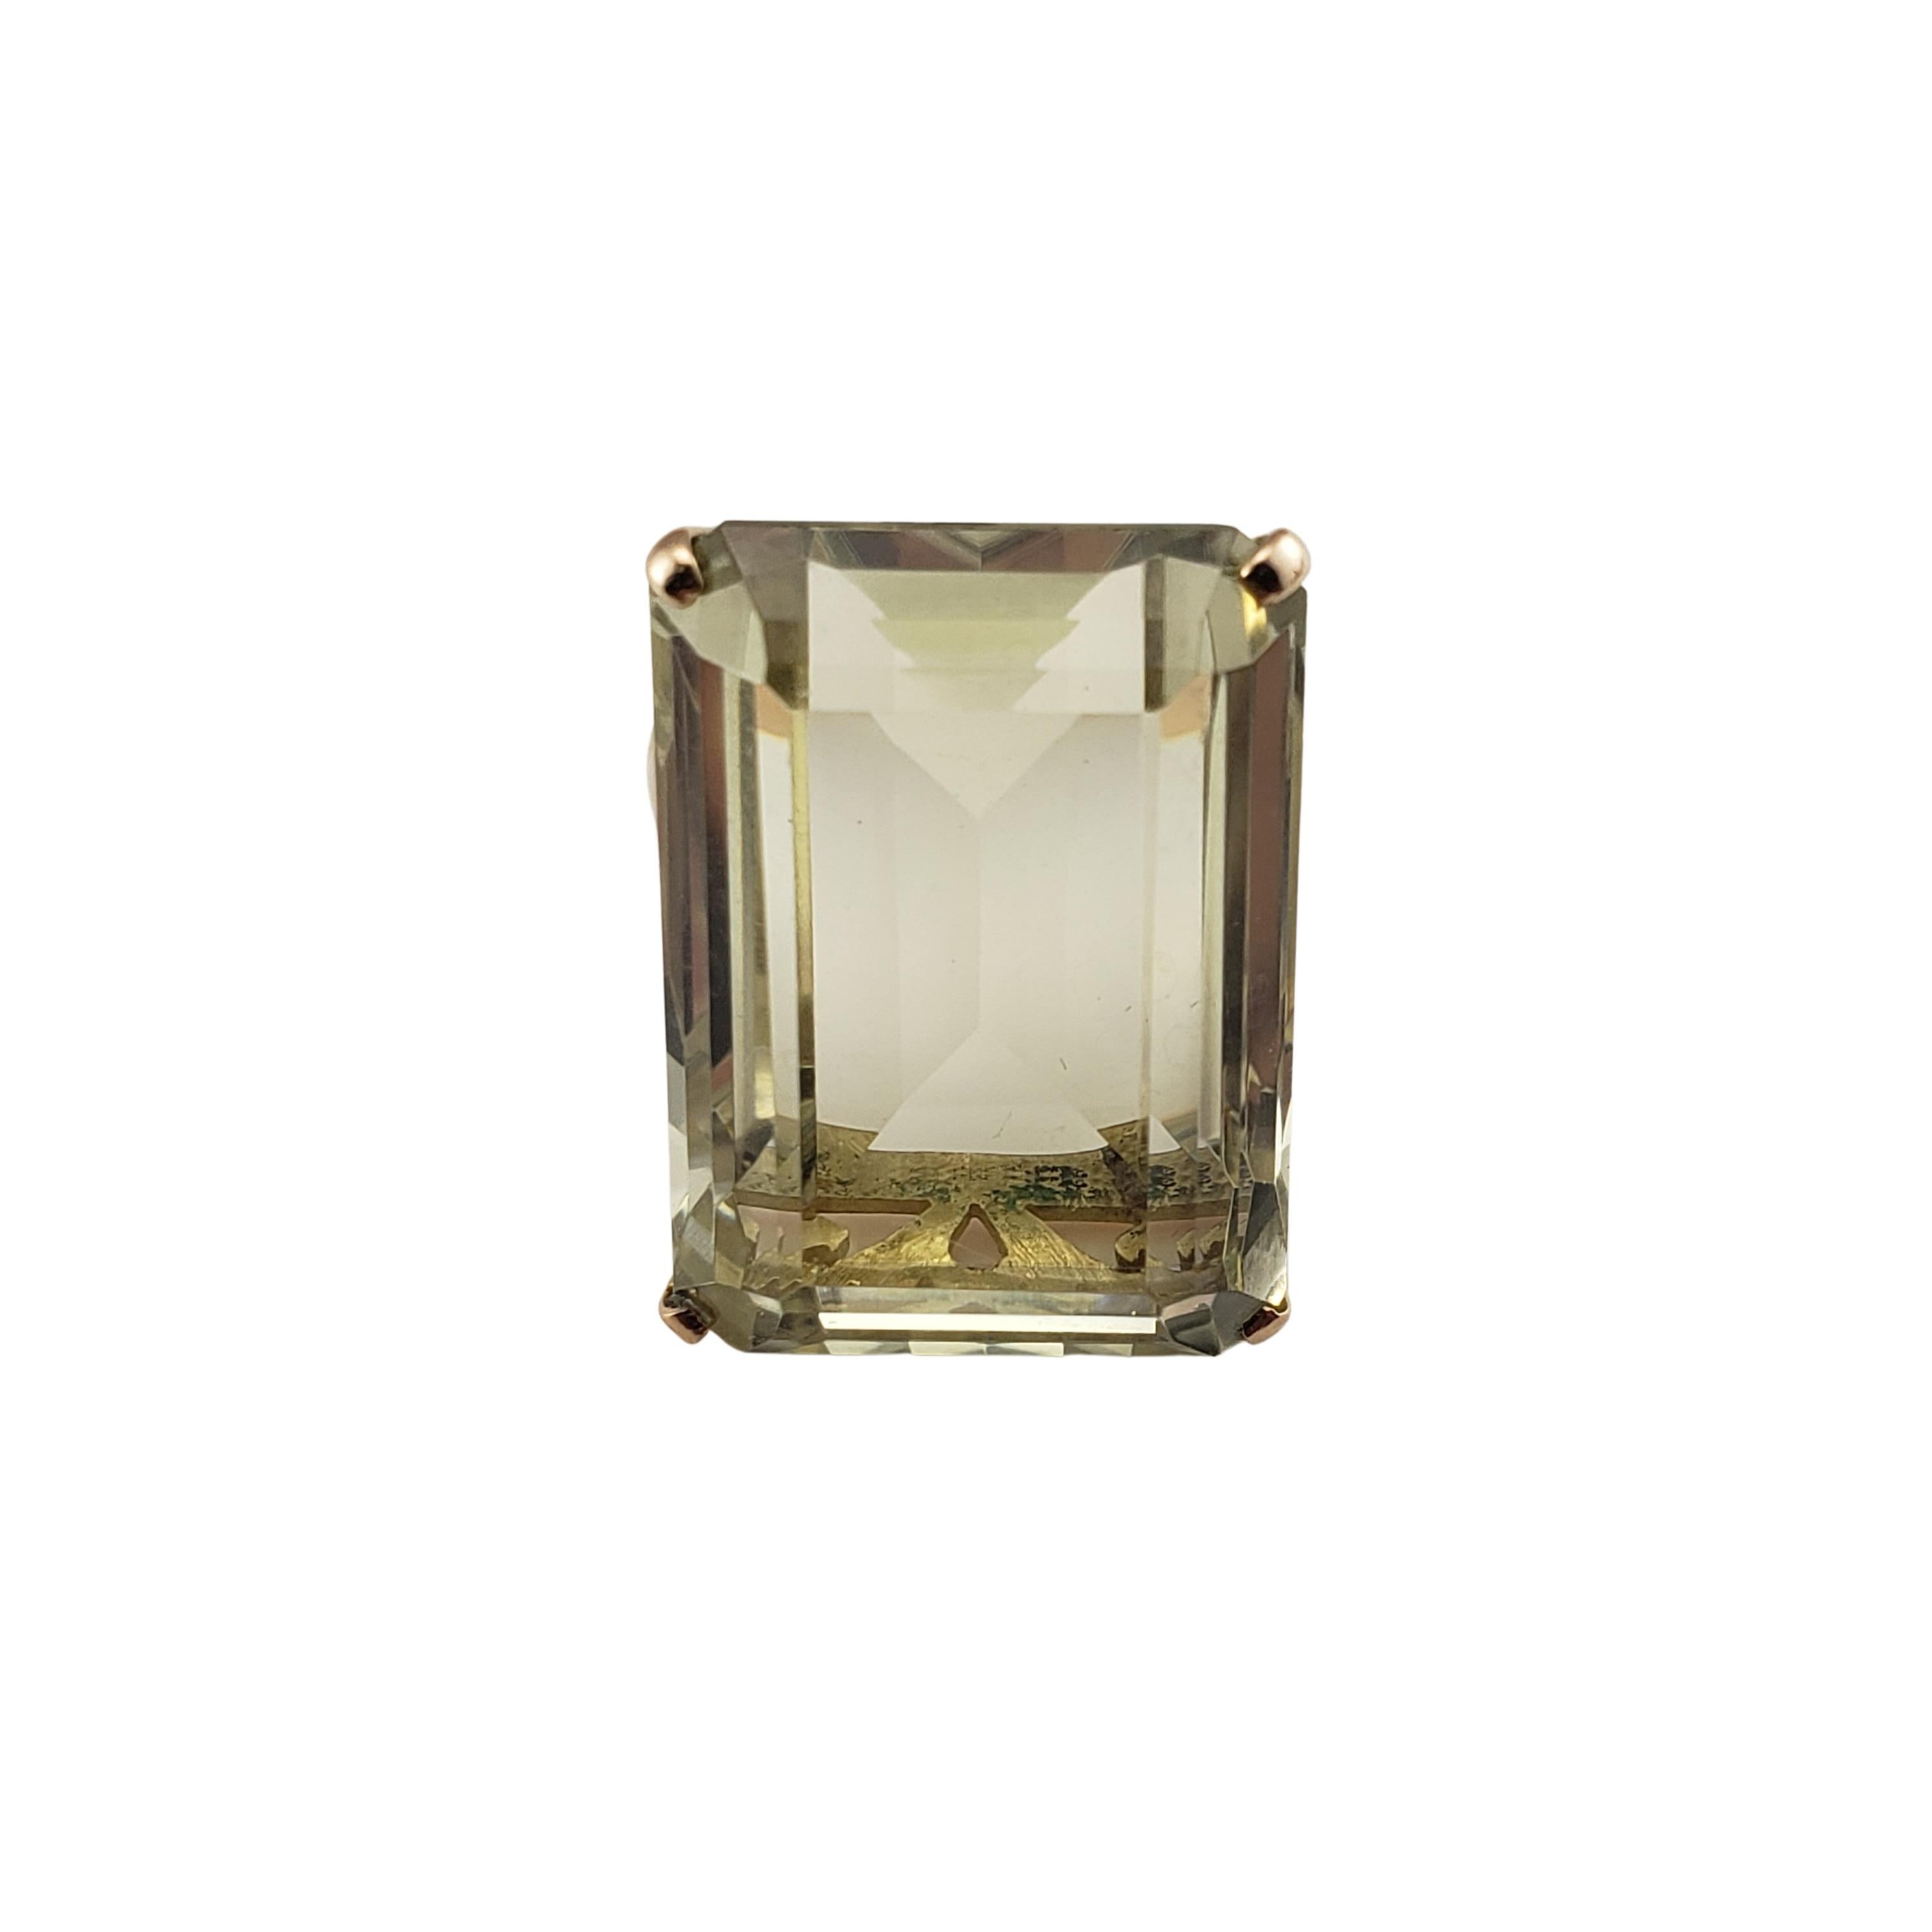 18 Karat Yellow Gold Smoky Quartz Ring Size 9 GAI Certified-

This stunning ring features one emerald cut smoky quartz (25 mm x 18 mm) set in classic 18K yellow gold.  Shank: 3 mm.

Total quartz weight:  37.18 ct.

Size: 9

Weight:  8.2 dwt. /  12.7